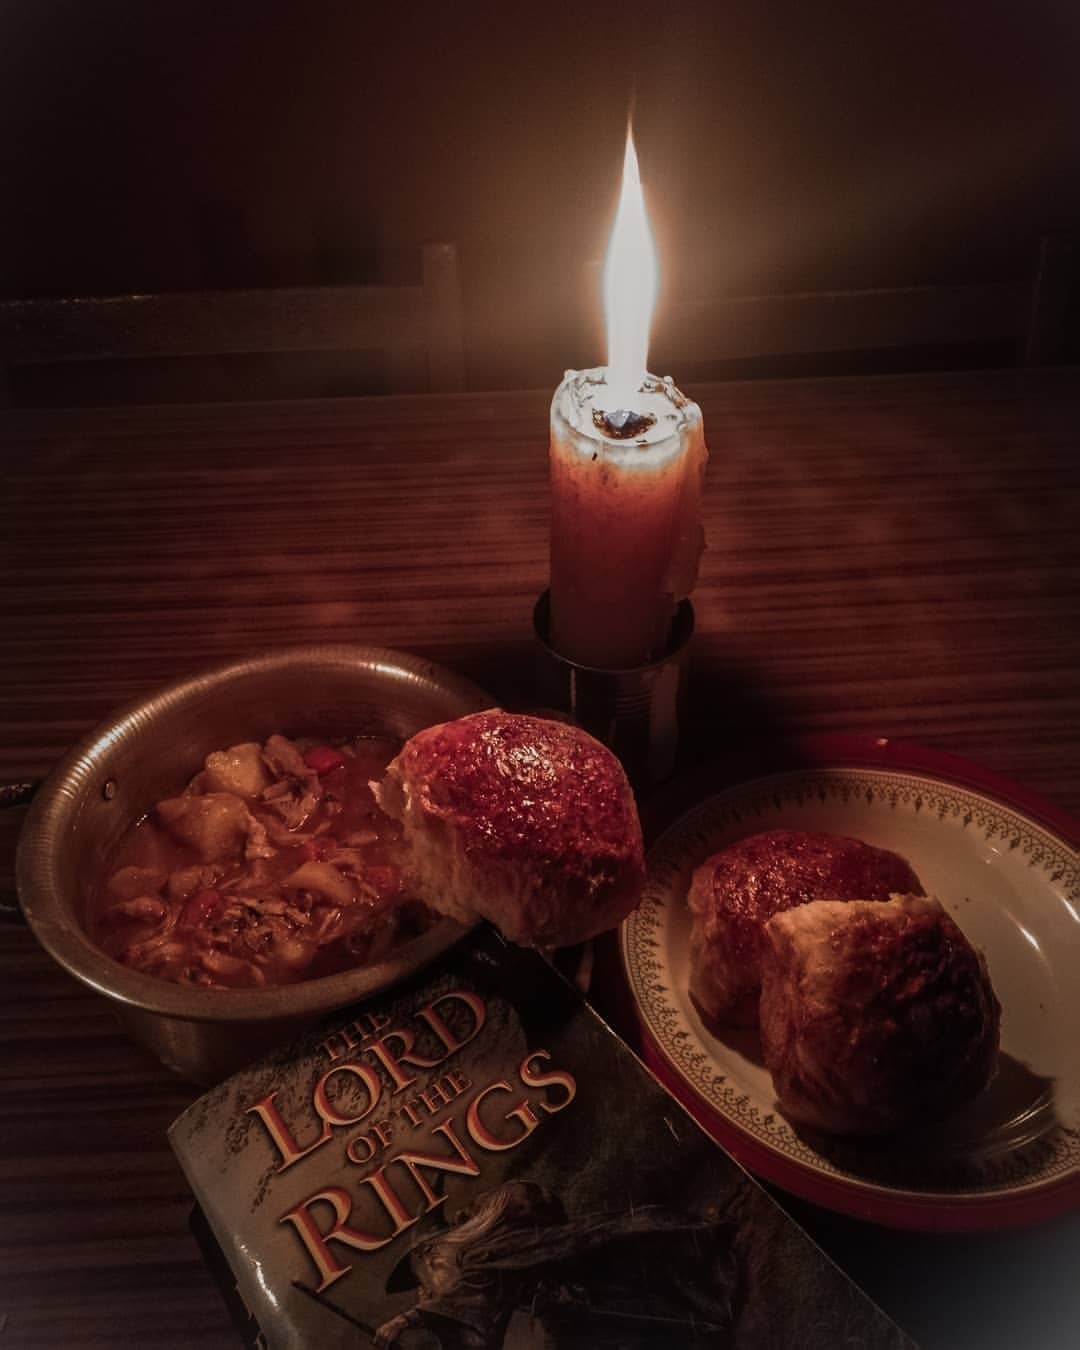 23.04.20 ⇟ ▪️
#quarantinebaking
Made @caskandquill’s “Samwise Gamgee’s Rabbit Stew” (hold the rabbit) and it was delicious with just home-made bread rolls and a myriad of candlelight because the power keeps conking off. 🍳
🔸 ———————-
📖 : Radiance
🎧 :...